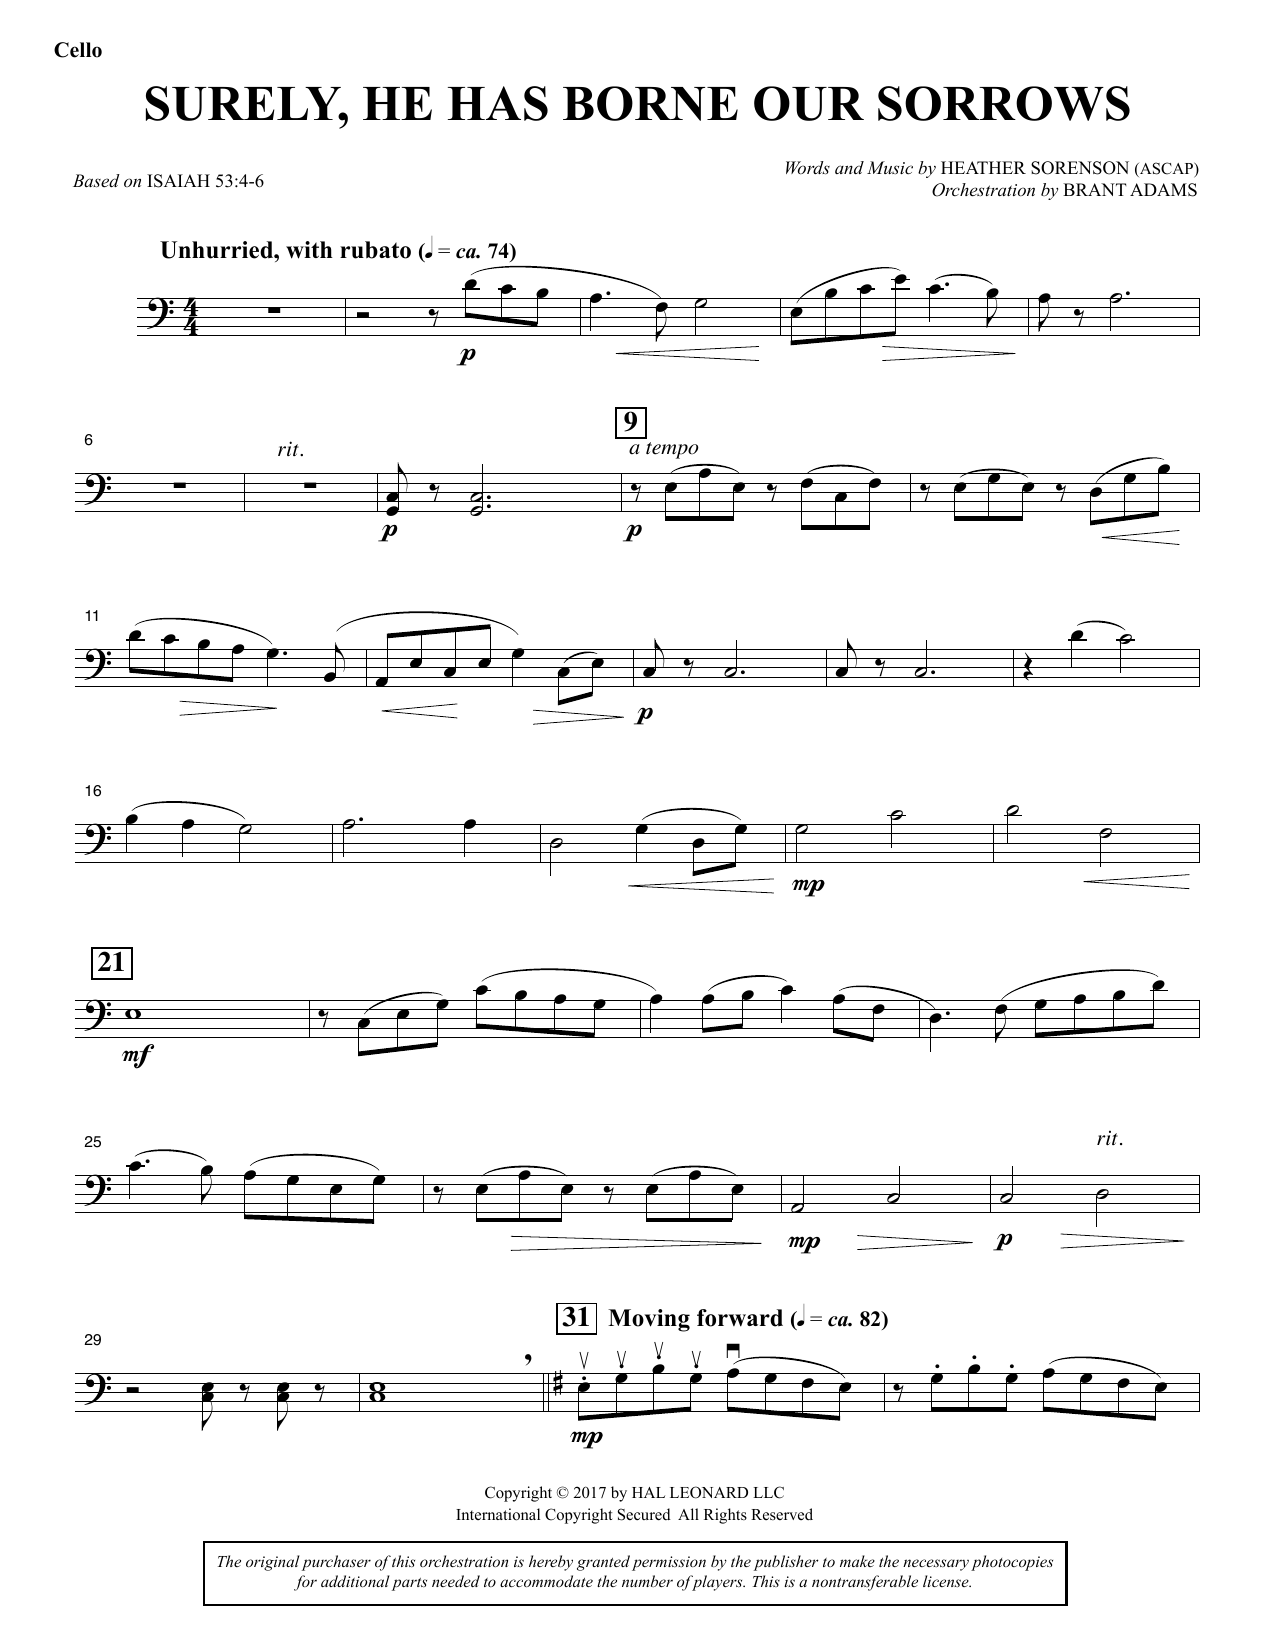 Download Heather Sorenson Surely, He Has Borne Our Sorrows - Cell Sheet Music